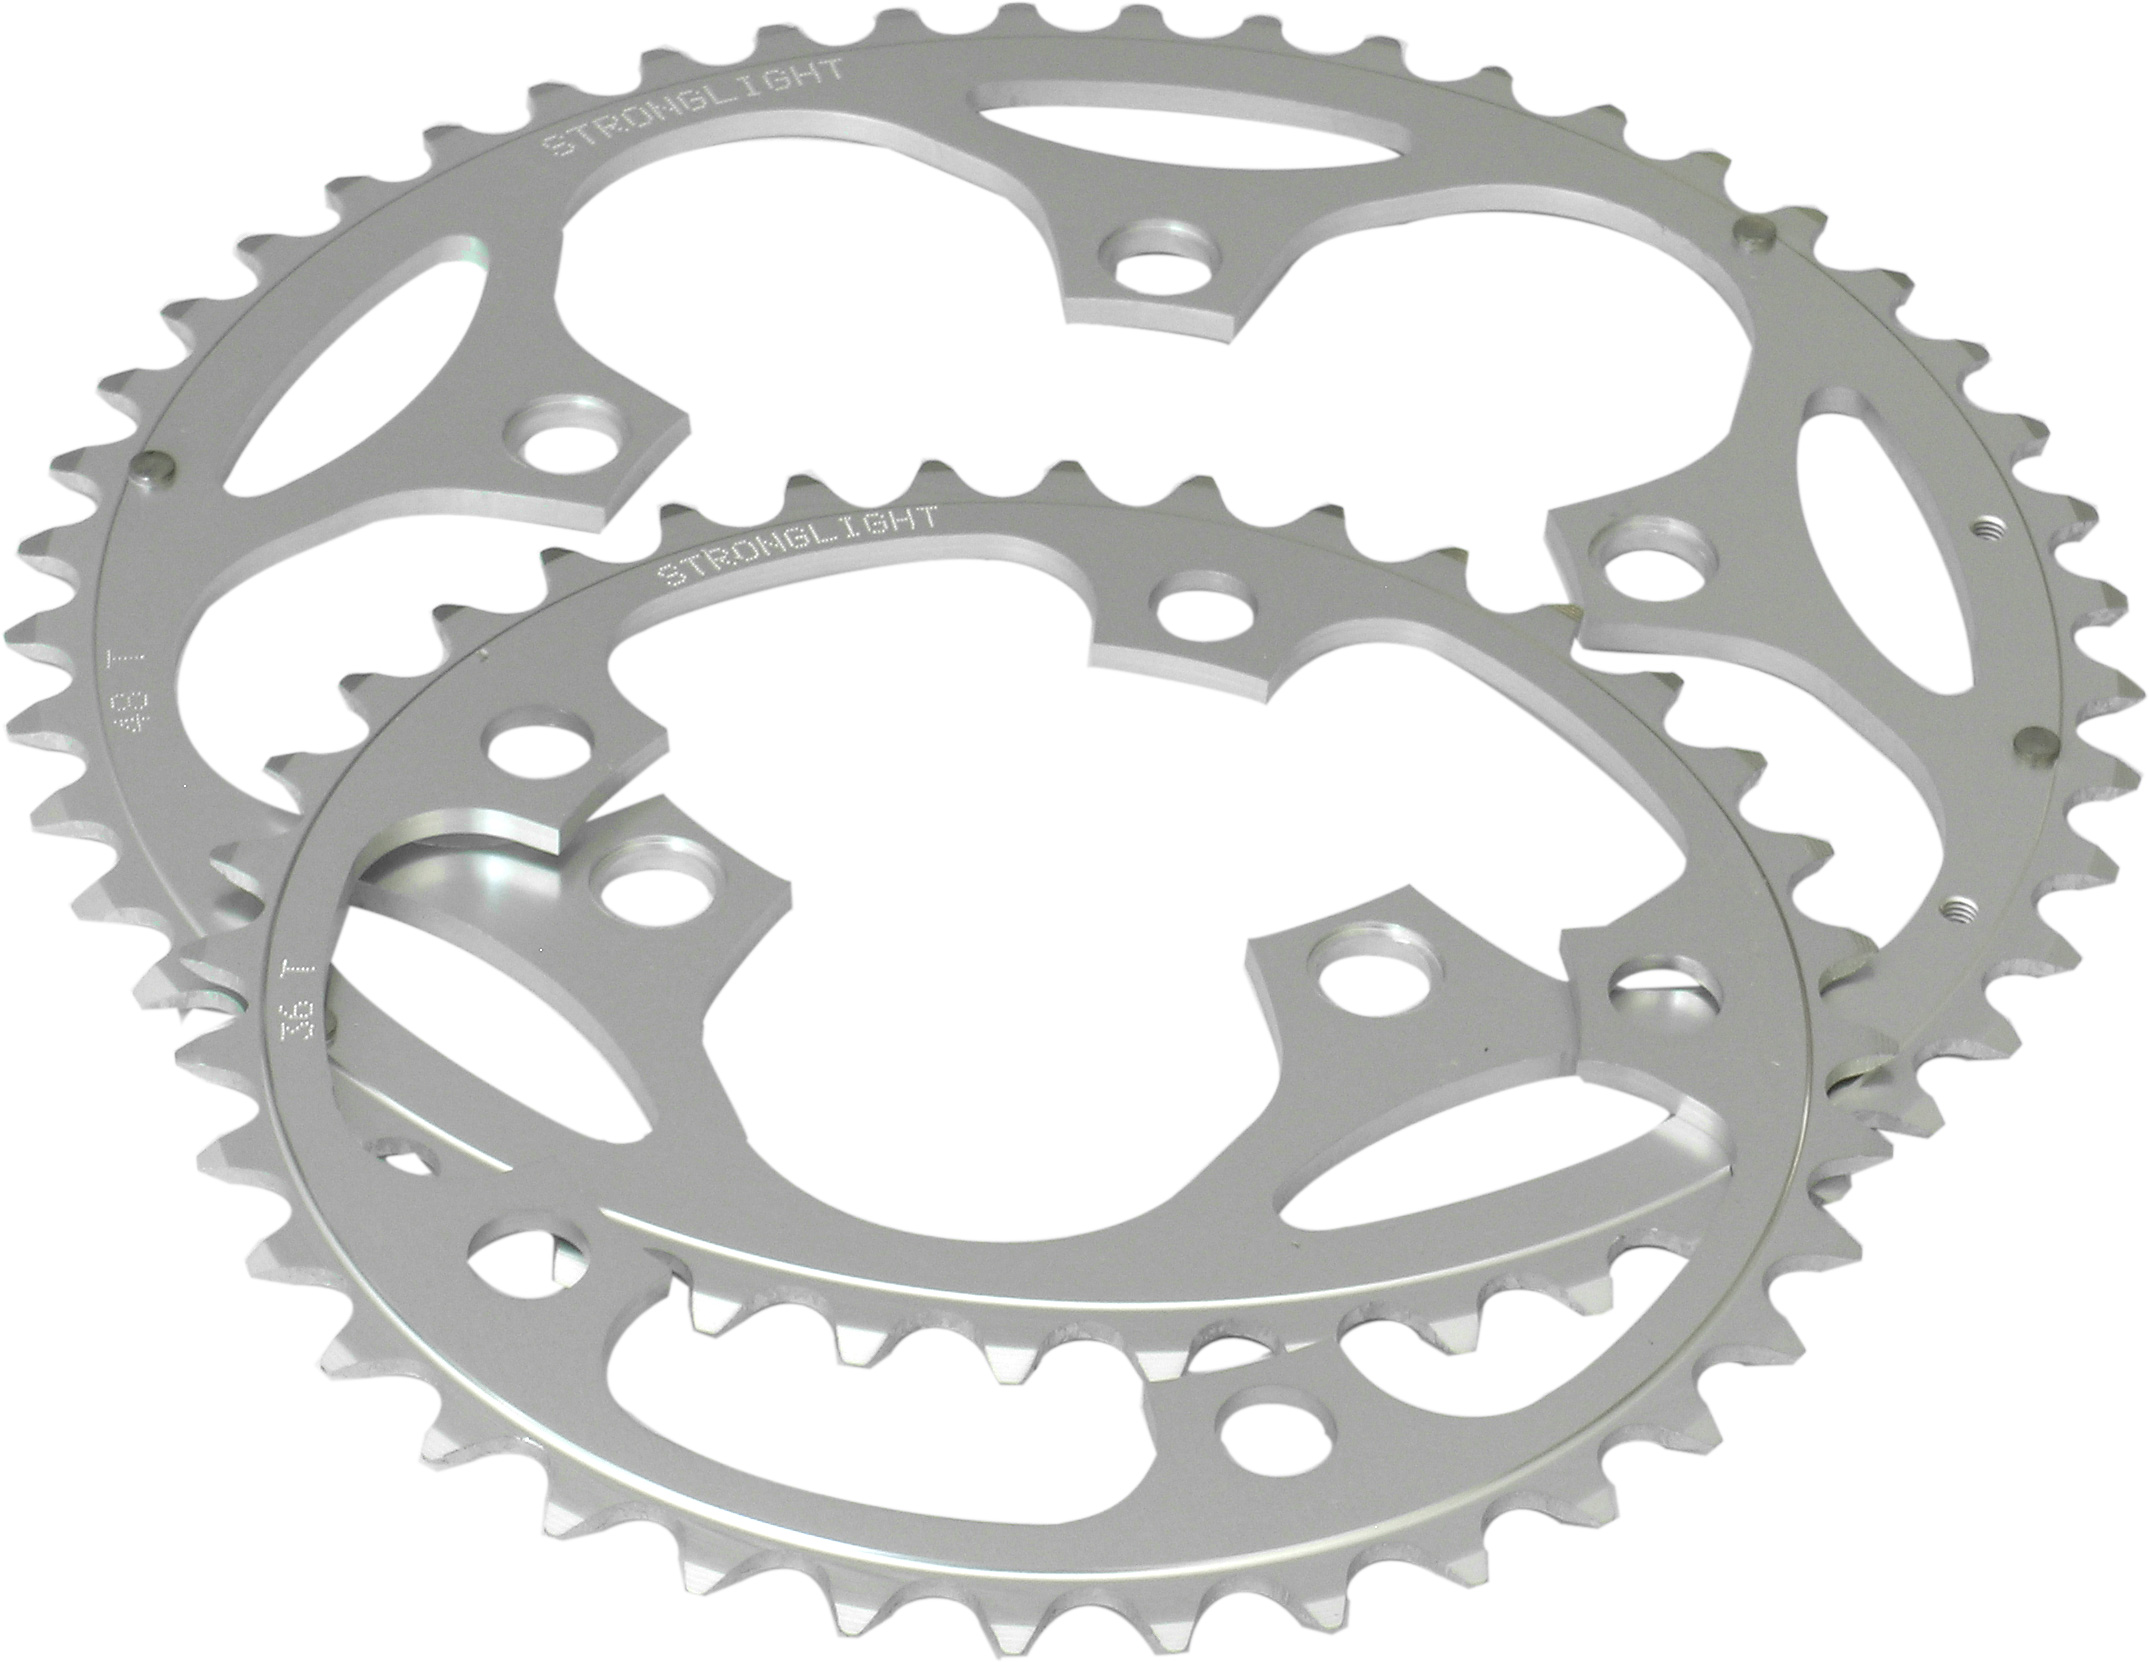 RD11052S Stronglight 52T Silver 5-Arm/110mm Chainring